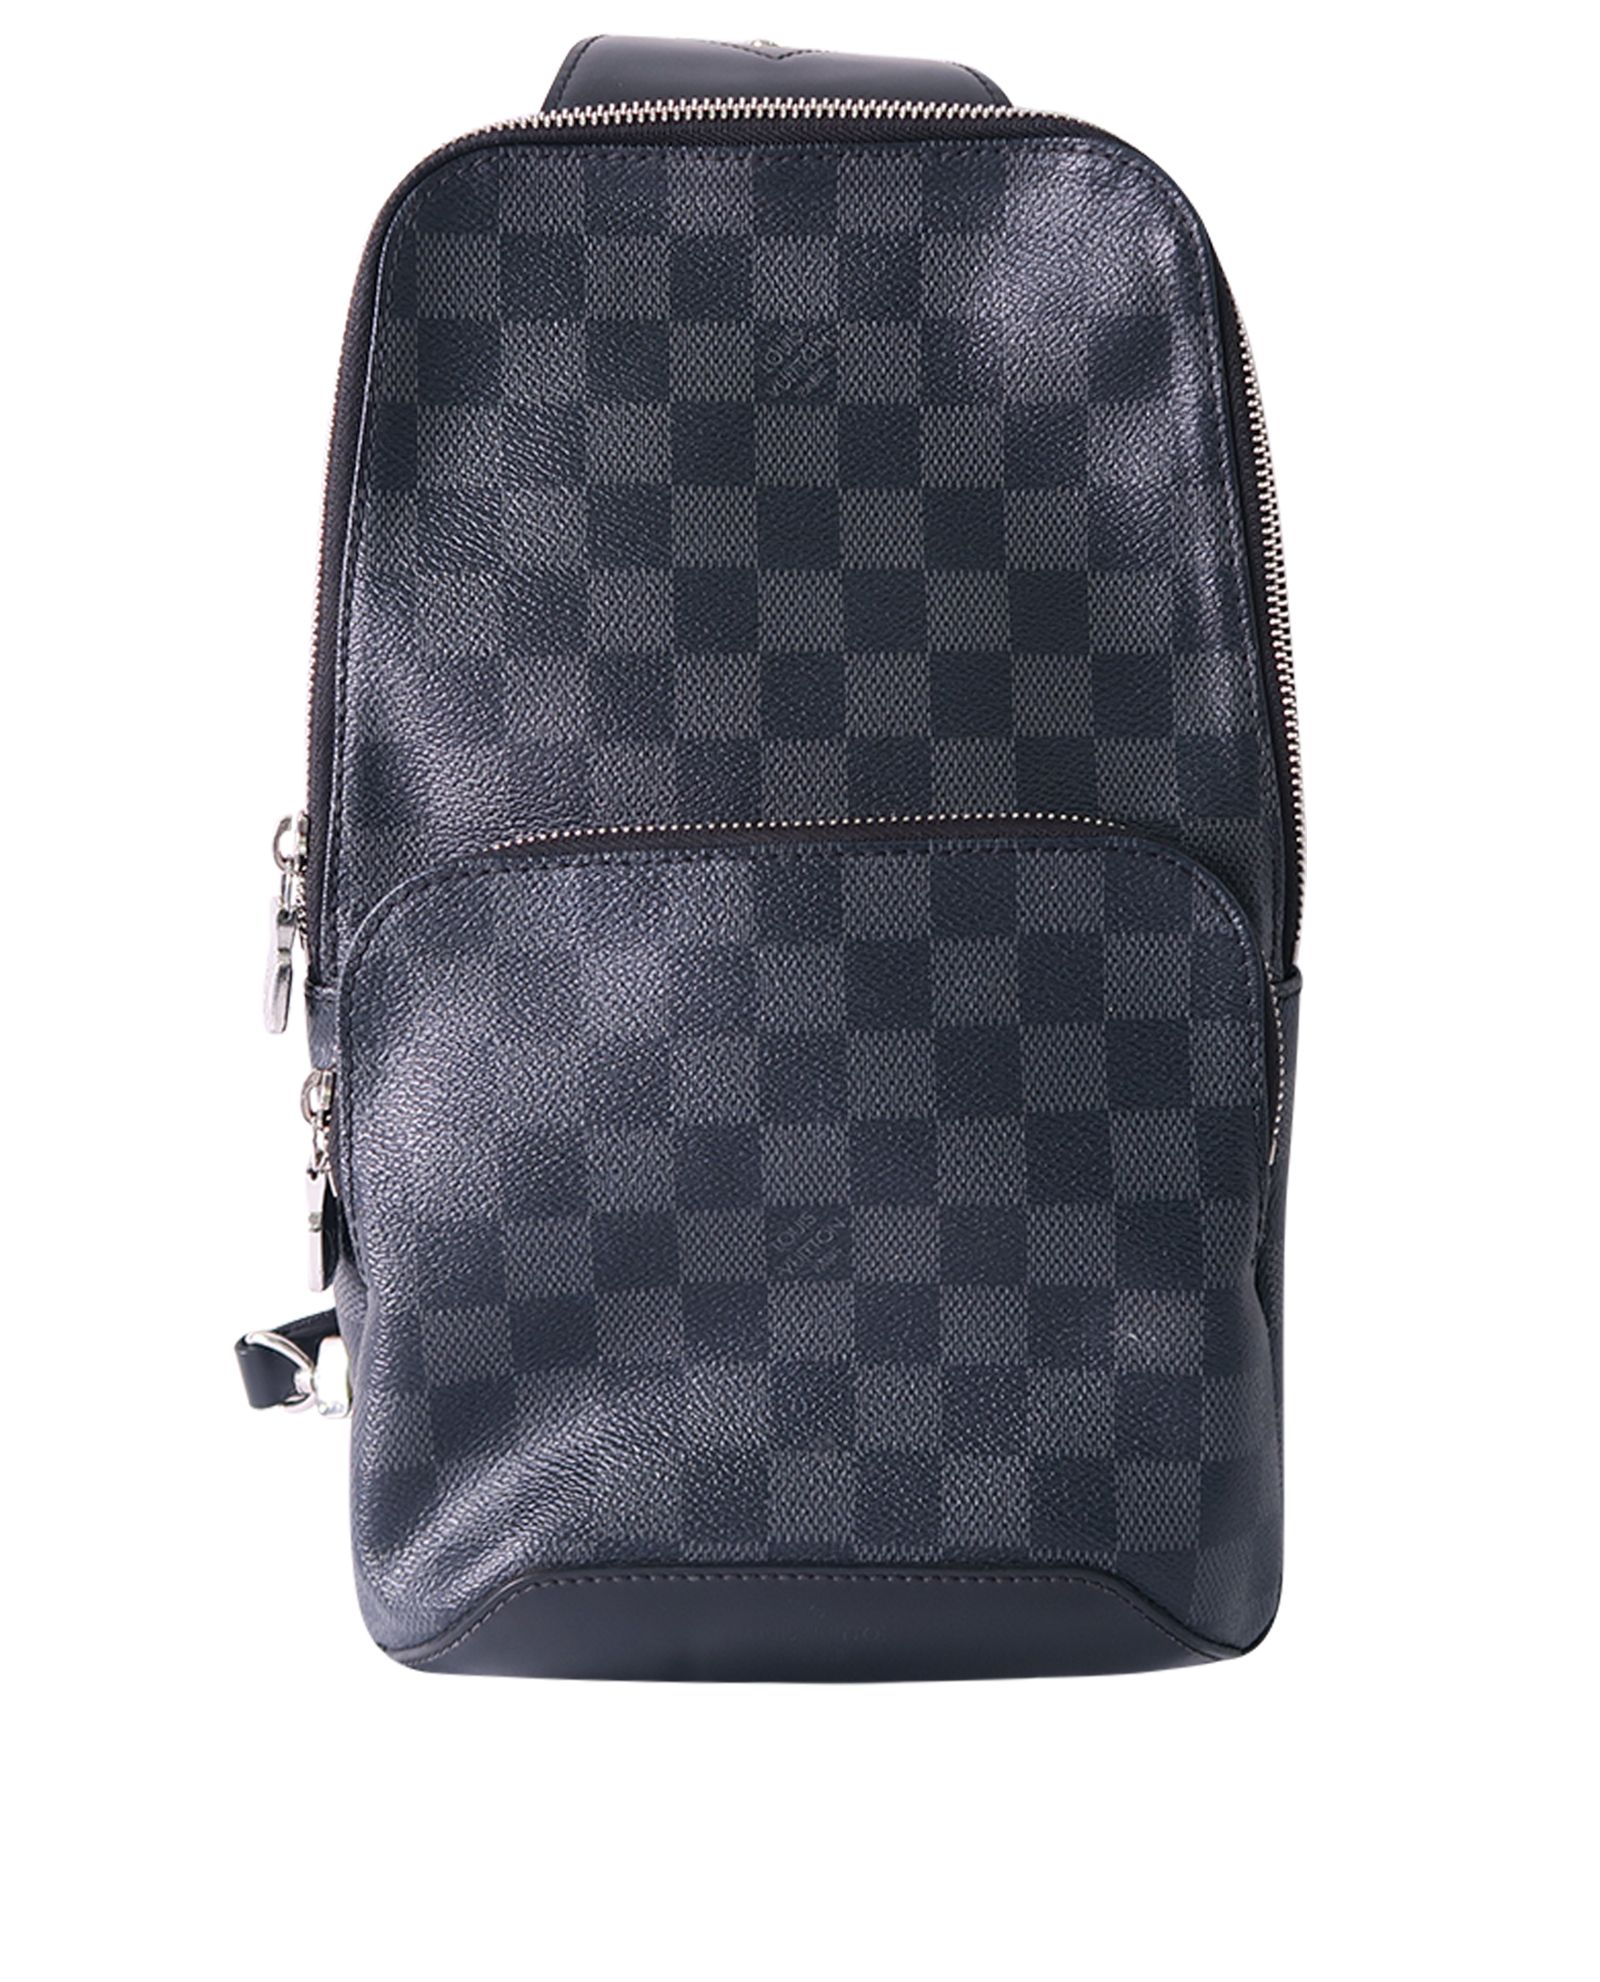 Avenue sling leather backpack Louis Vuitton Black in Leather